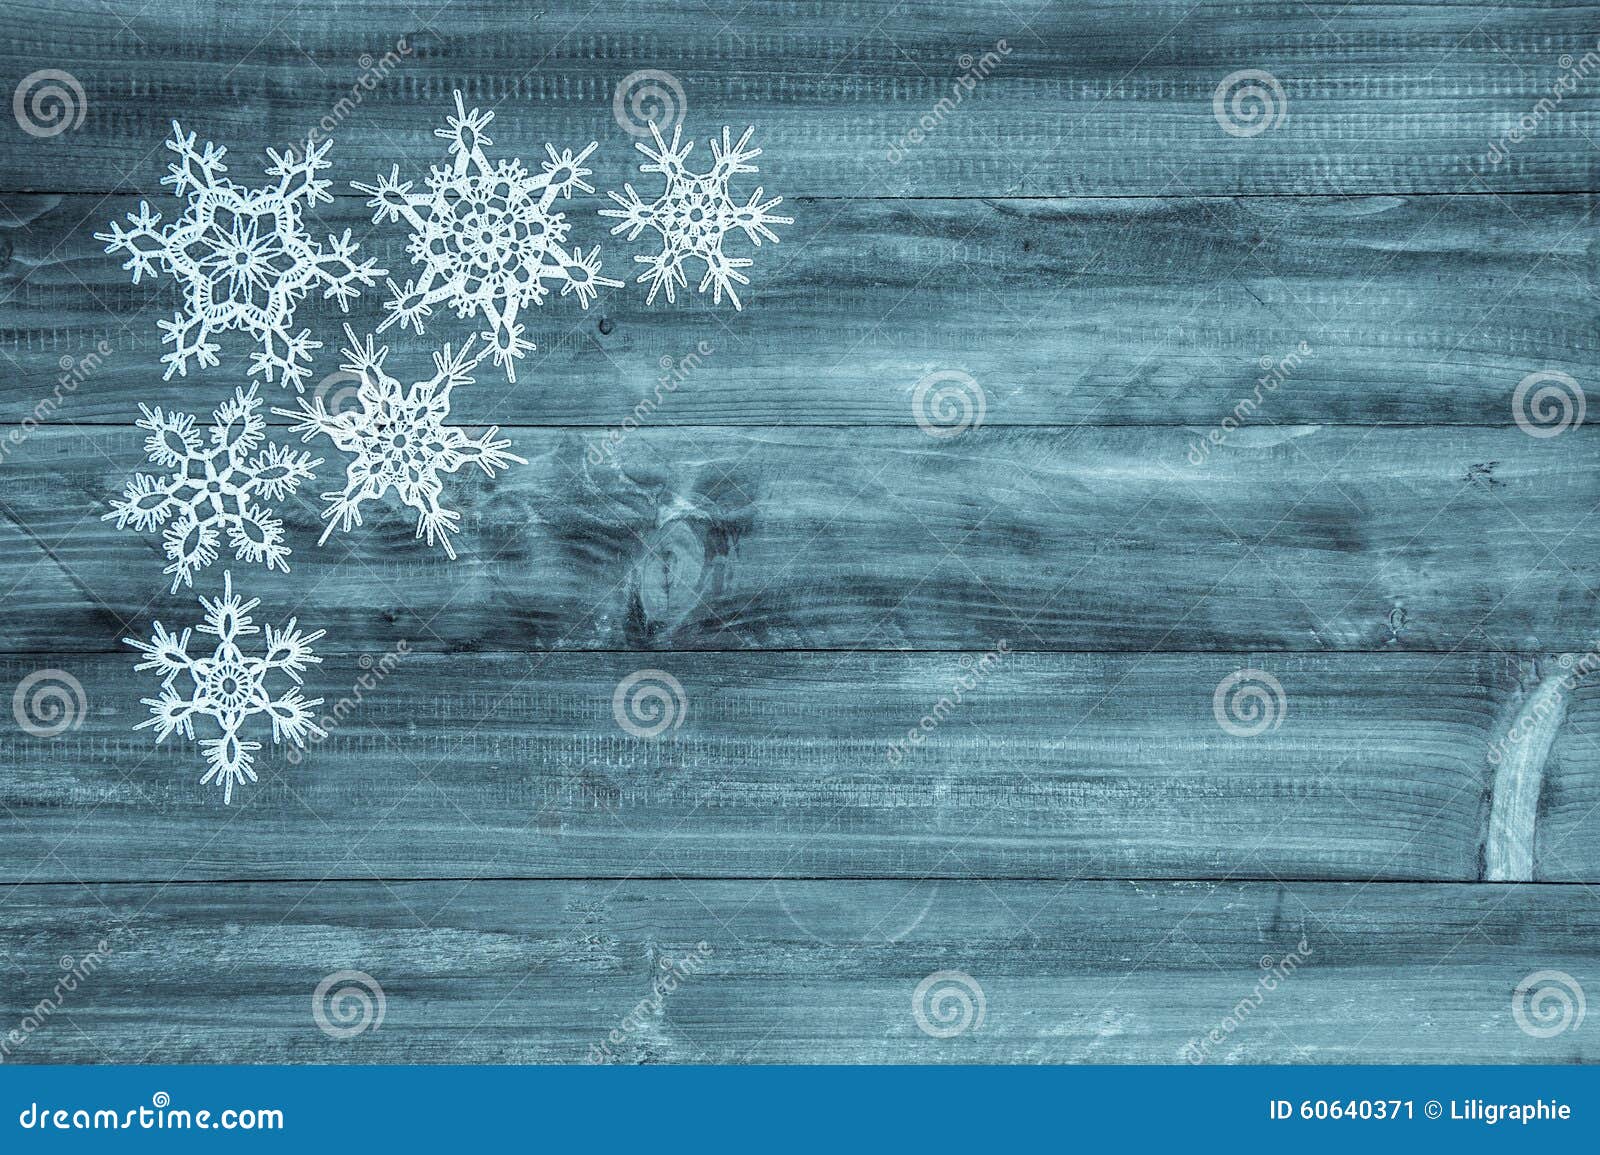 Christmas Soft Beige Wooden Snowflakes On A Wood White Background Stock  Photo - Download Image Now - iStock